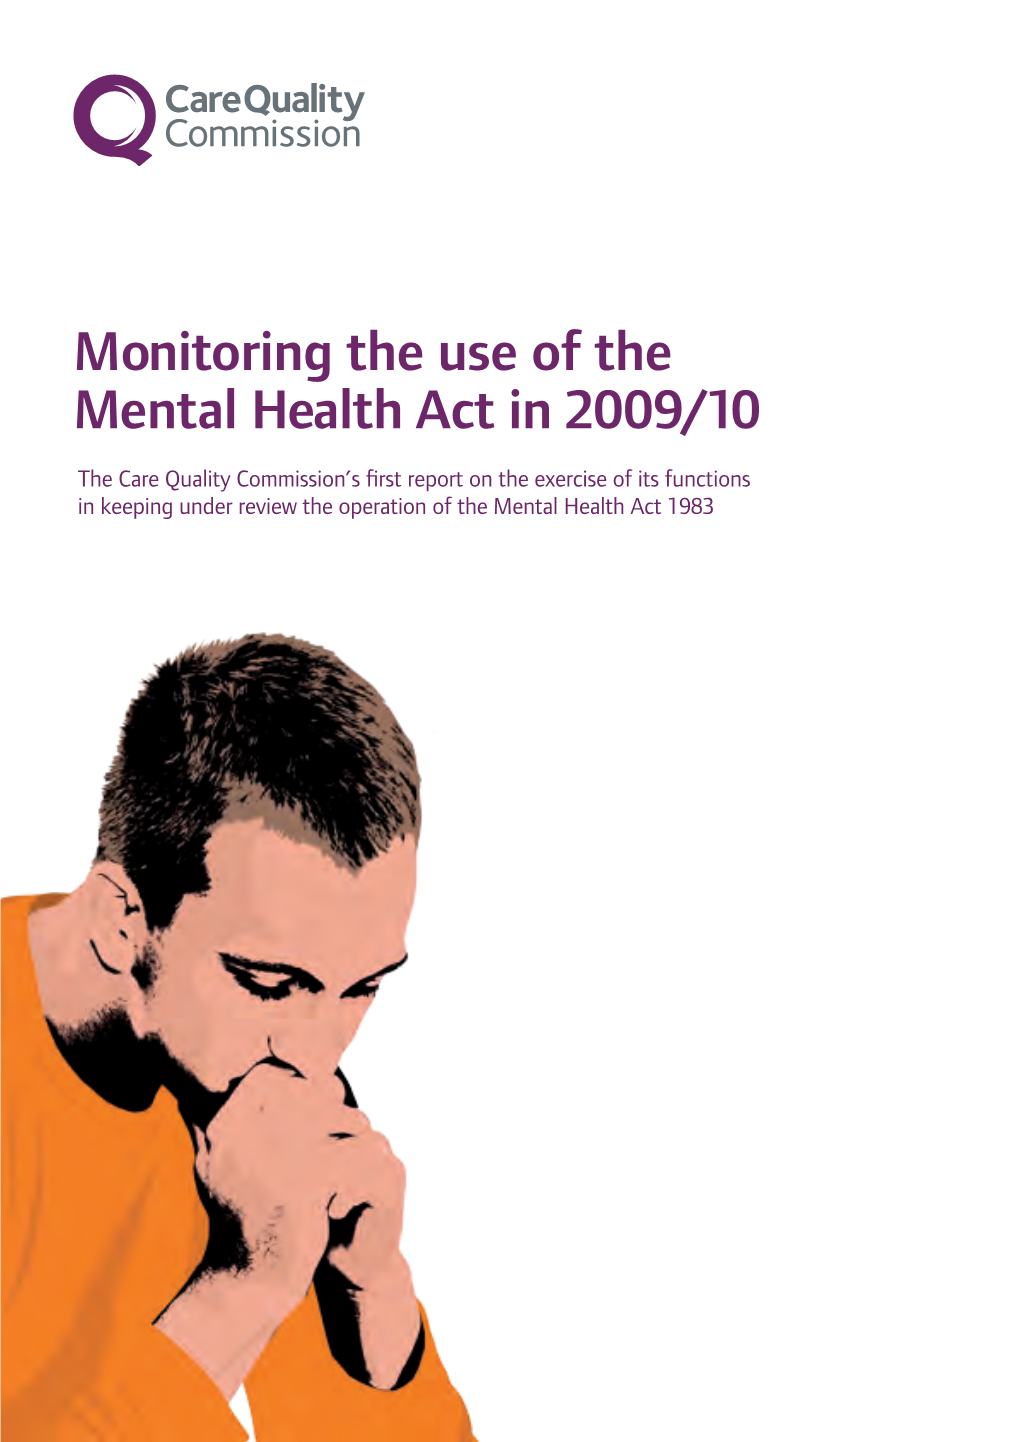 Monitoring the Use of the Mental Health Act in 2009/10